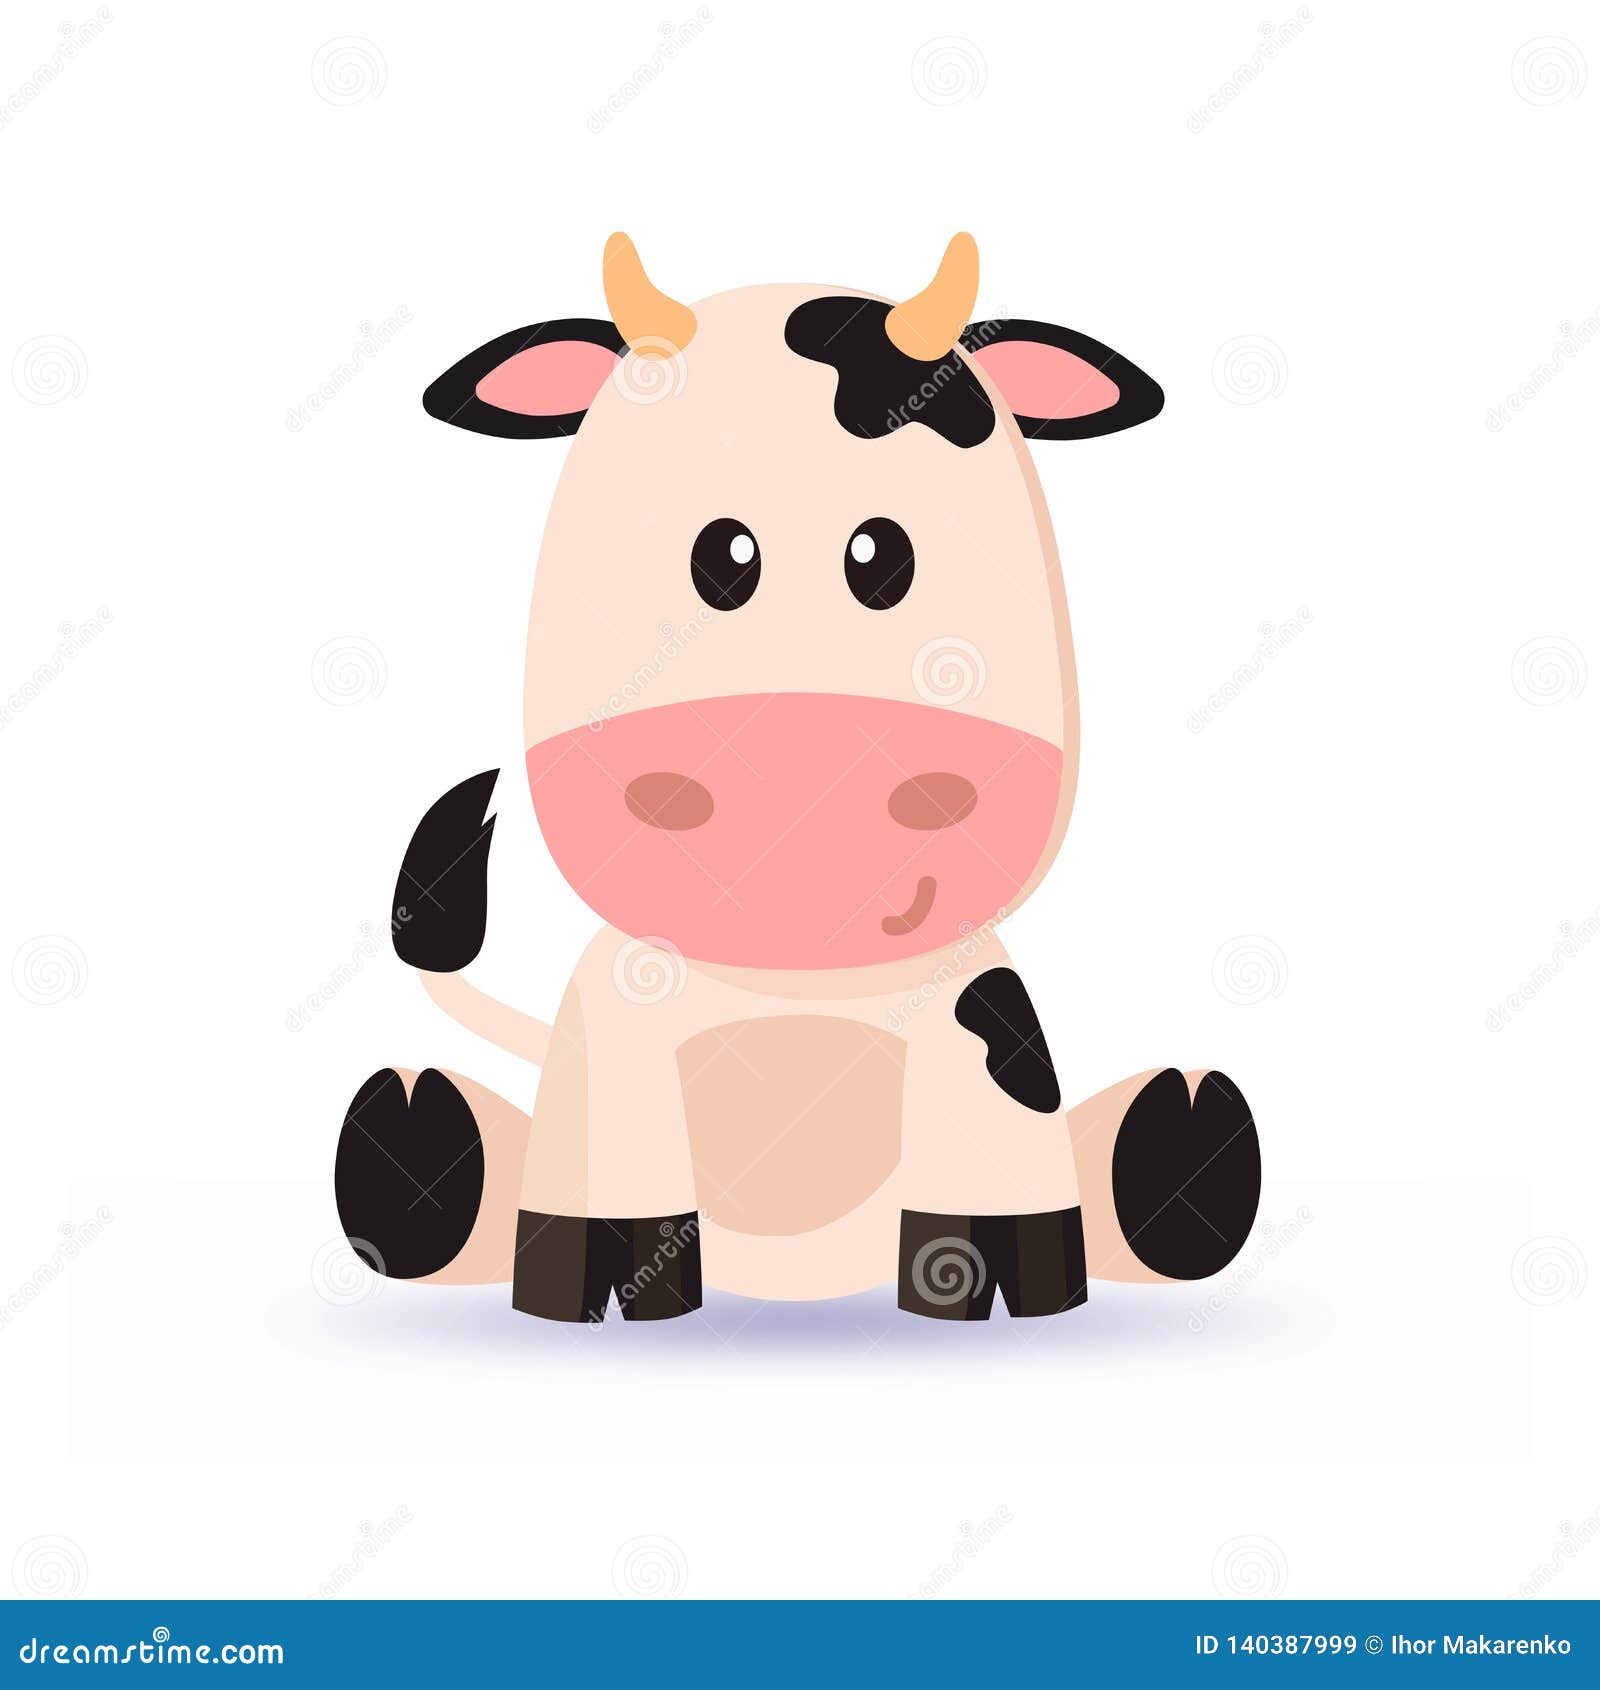 Download Cartoon Cute Cow Vector With Soft Shadow Stock Vector ...